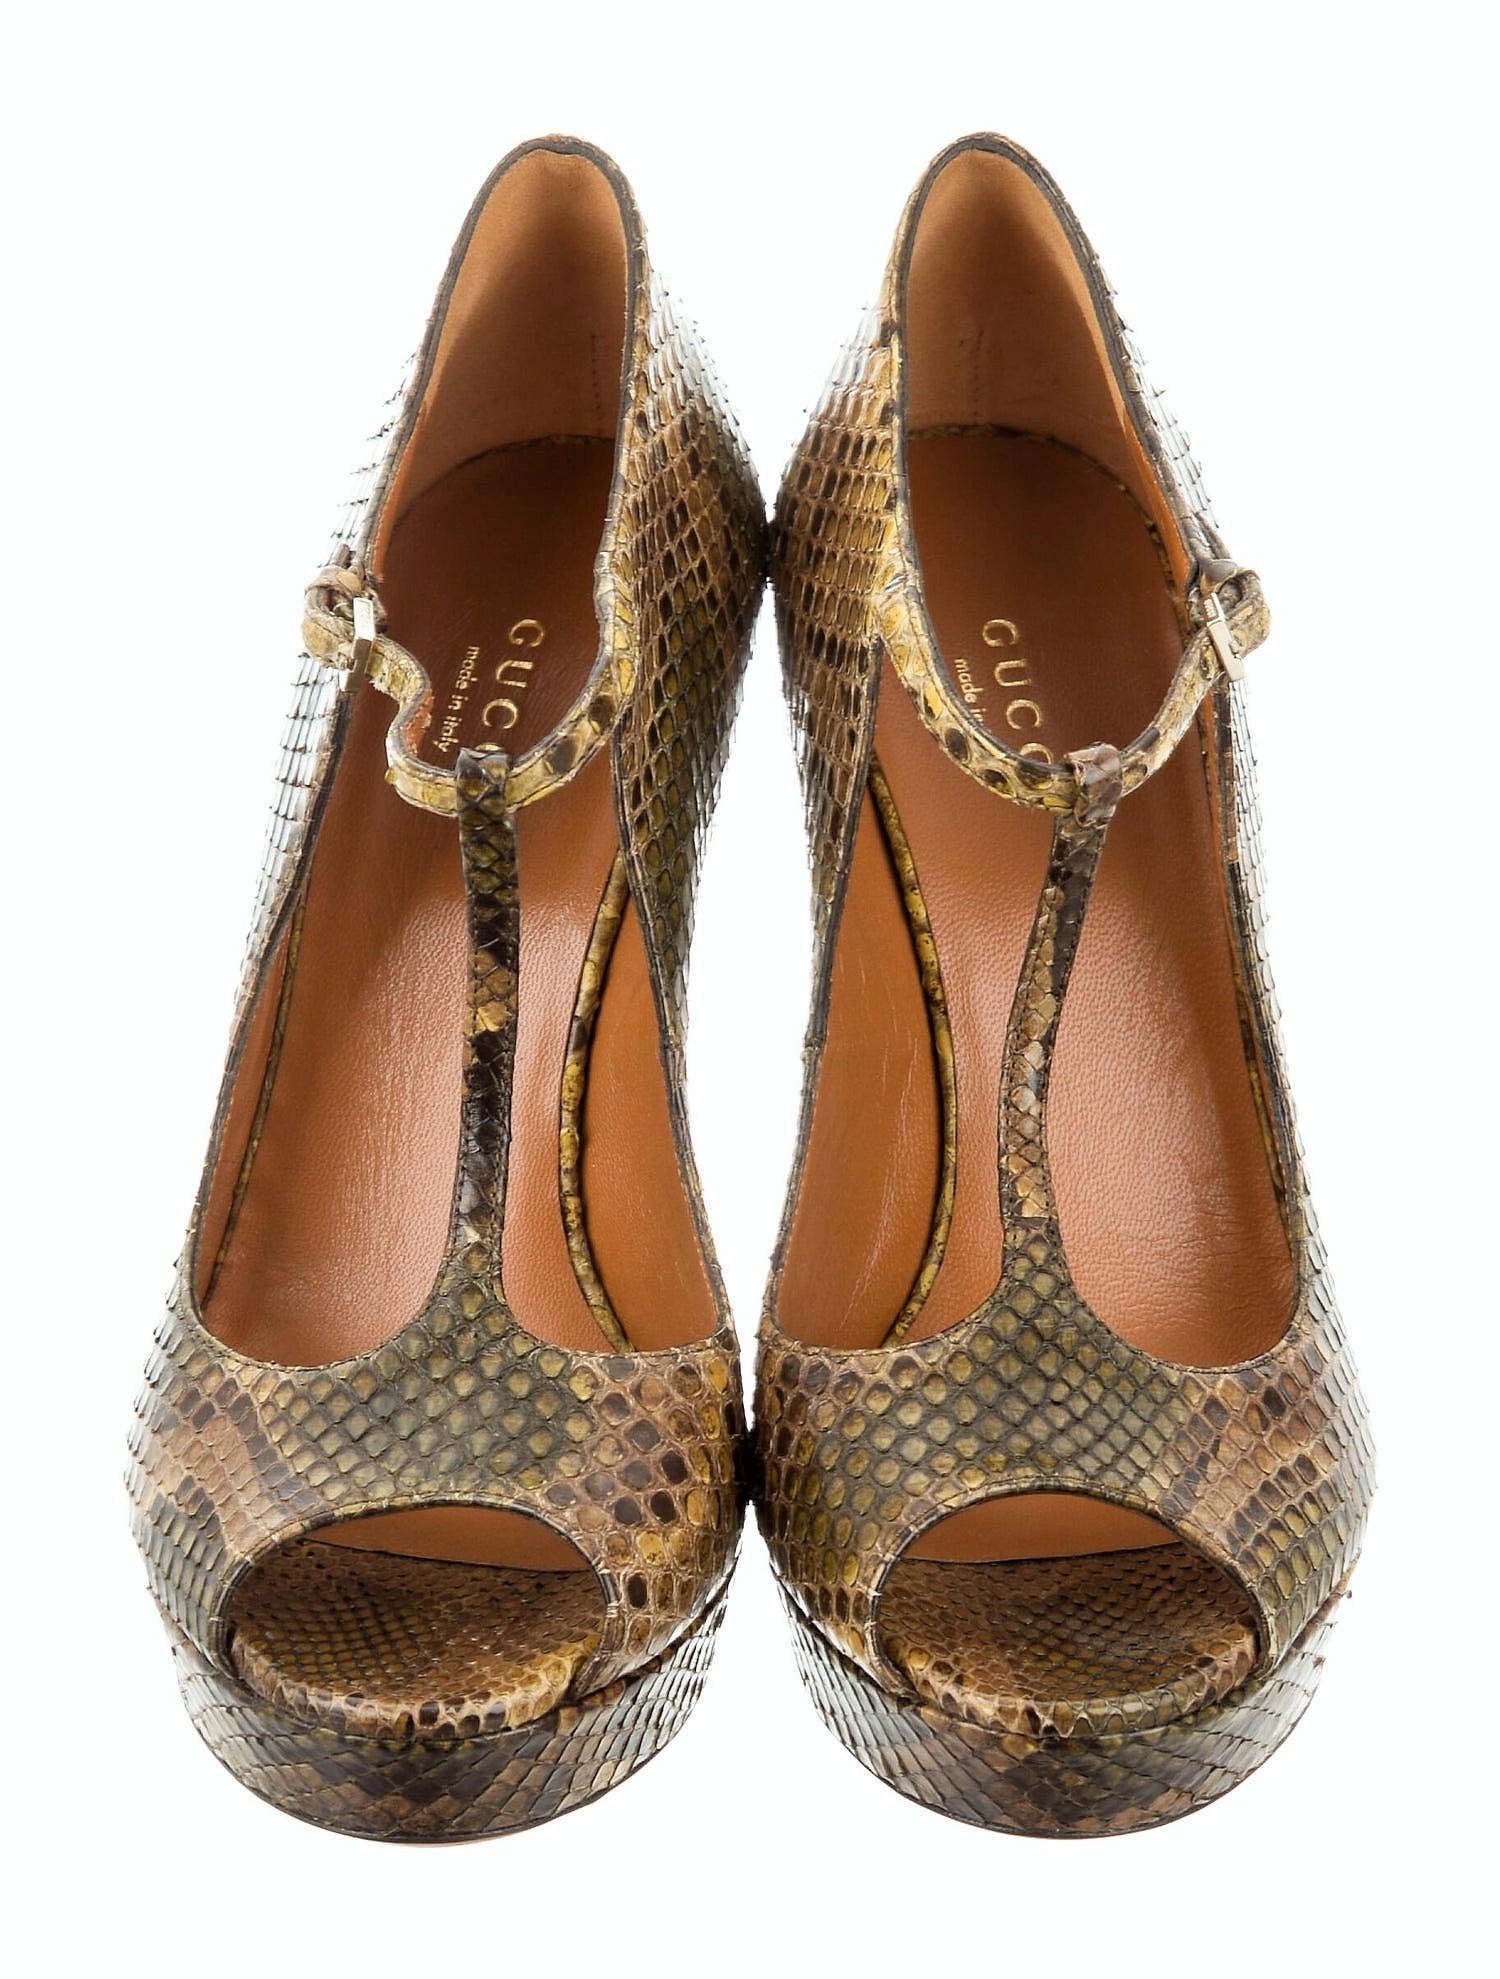 New Gucci 90th Anniversary Ad Runway Python Snakeskin Pump Heels Sz 37  In New Condition For Sale In Leesburg, VA